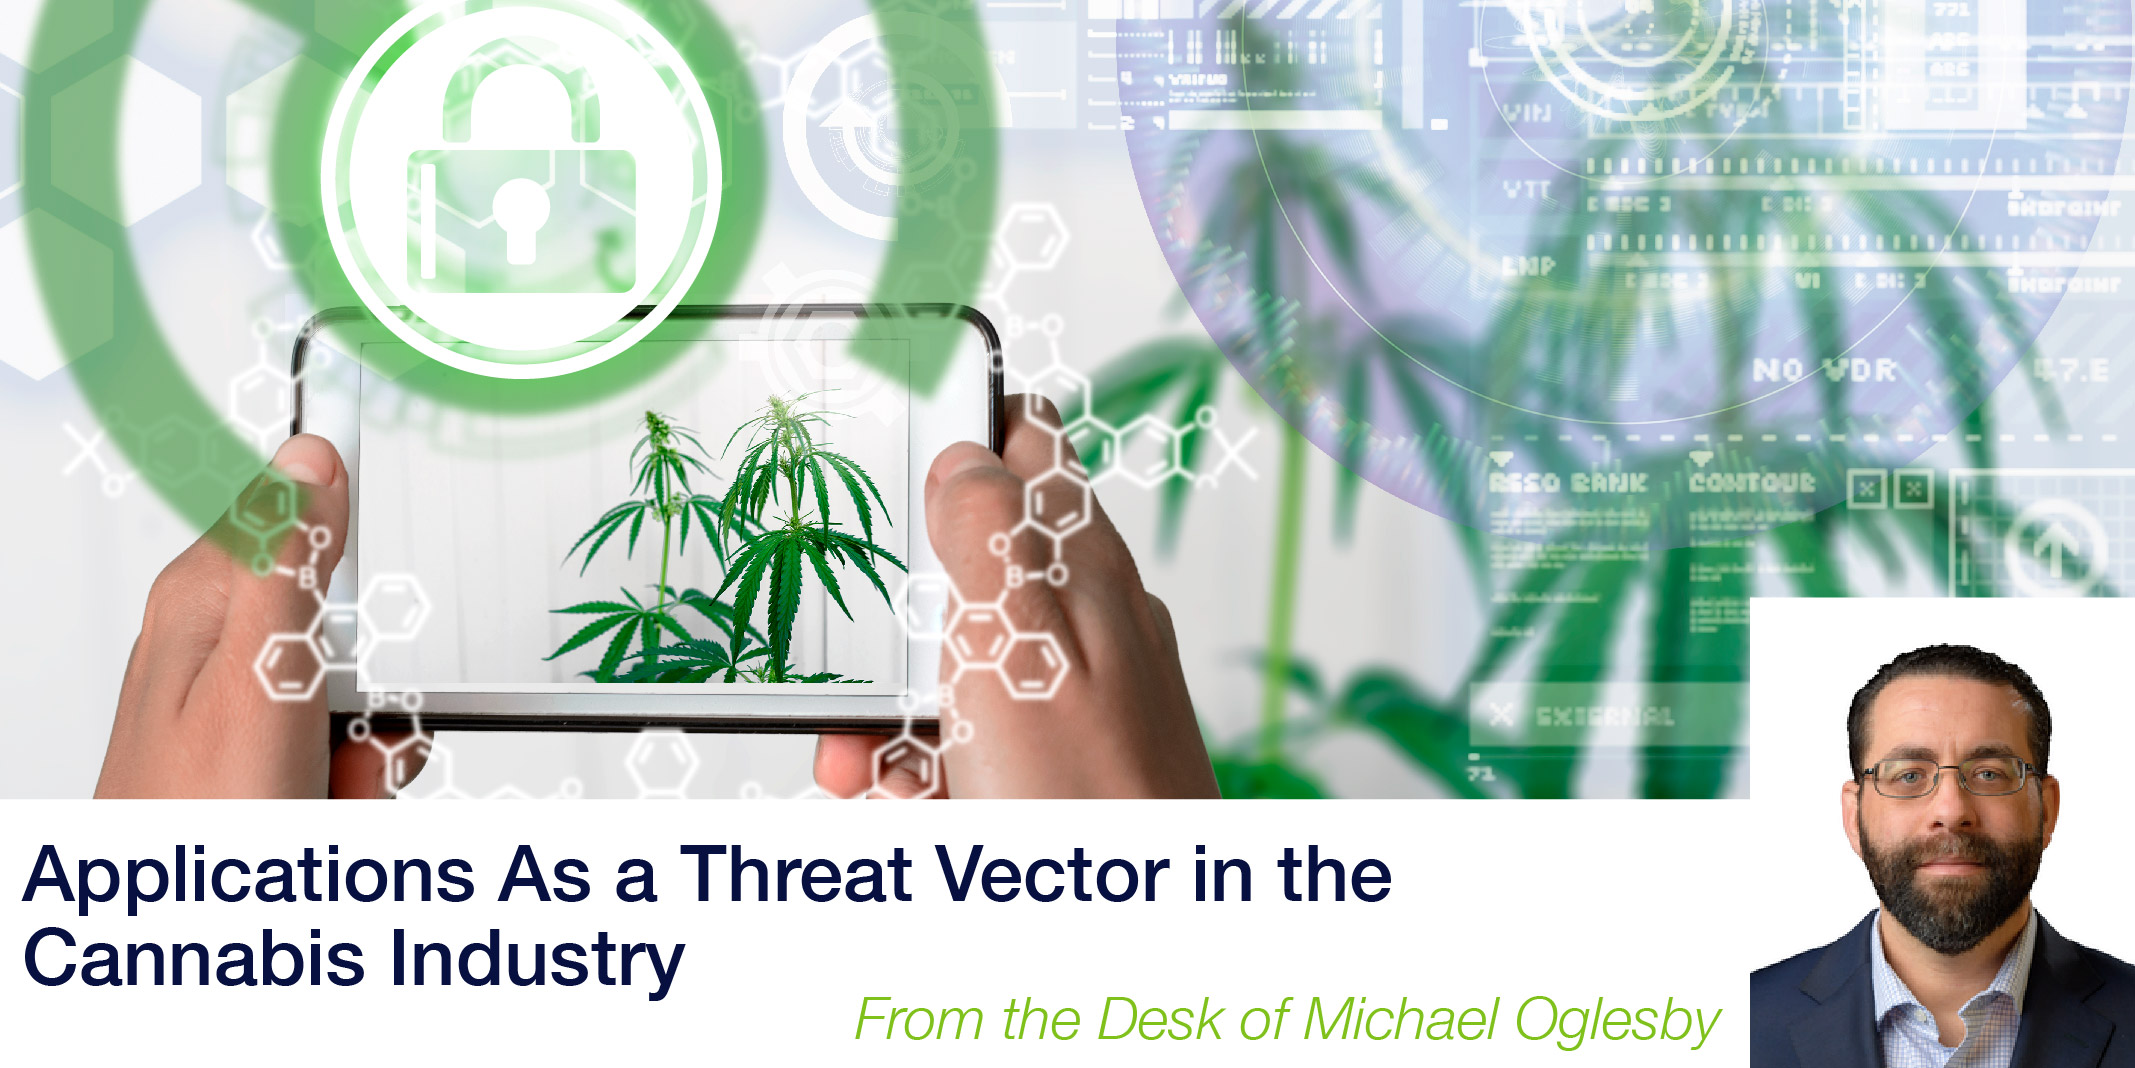 Applications As a Threat Vector in the Cannabis Industry